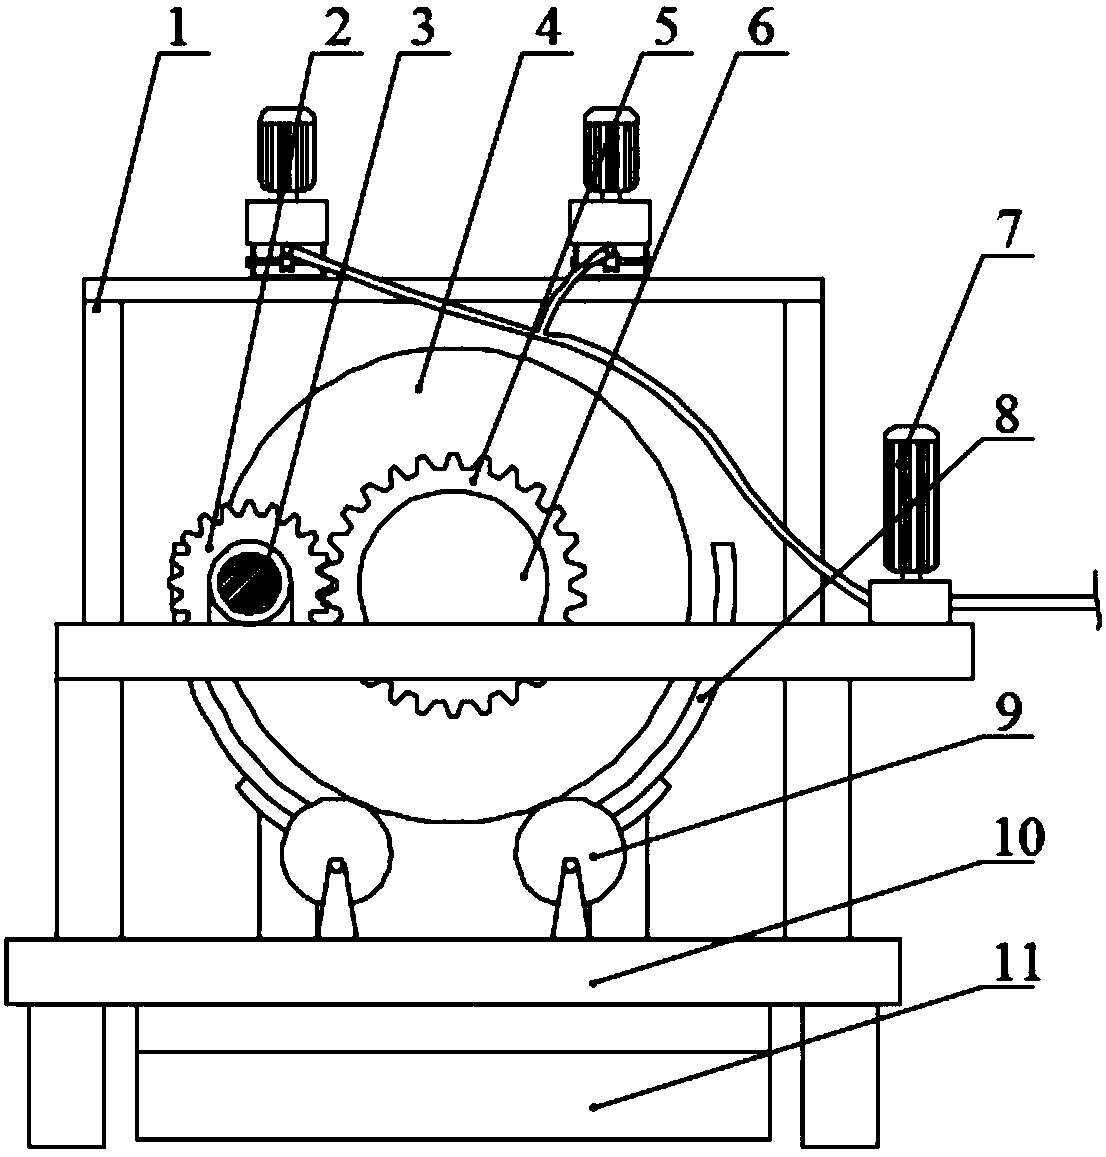 Centrifugal cleaning device for perilla leaves